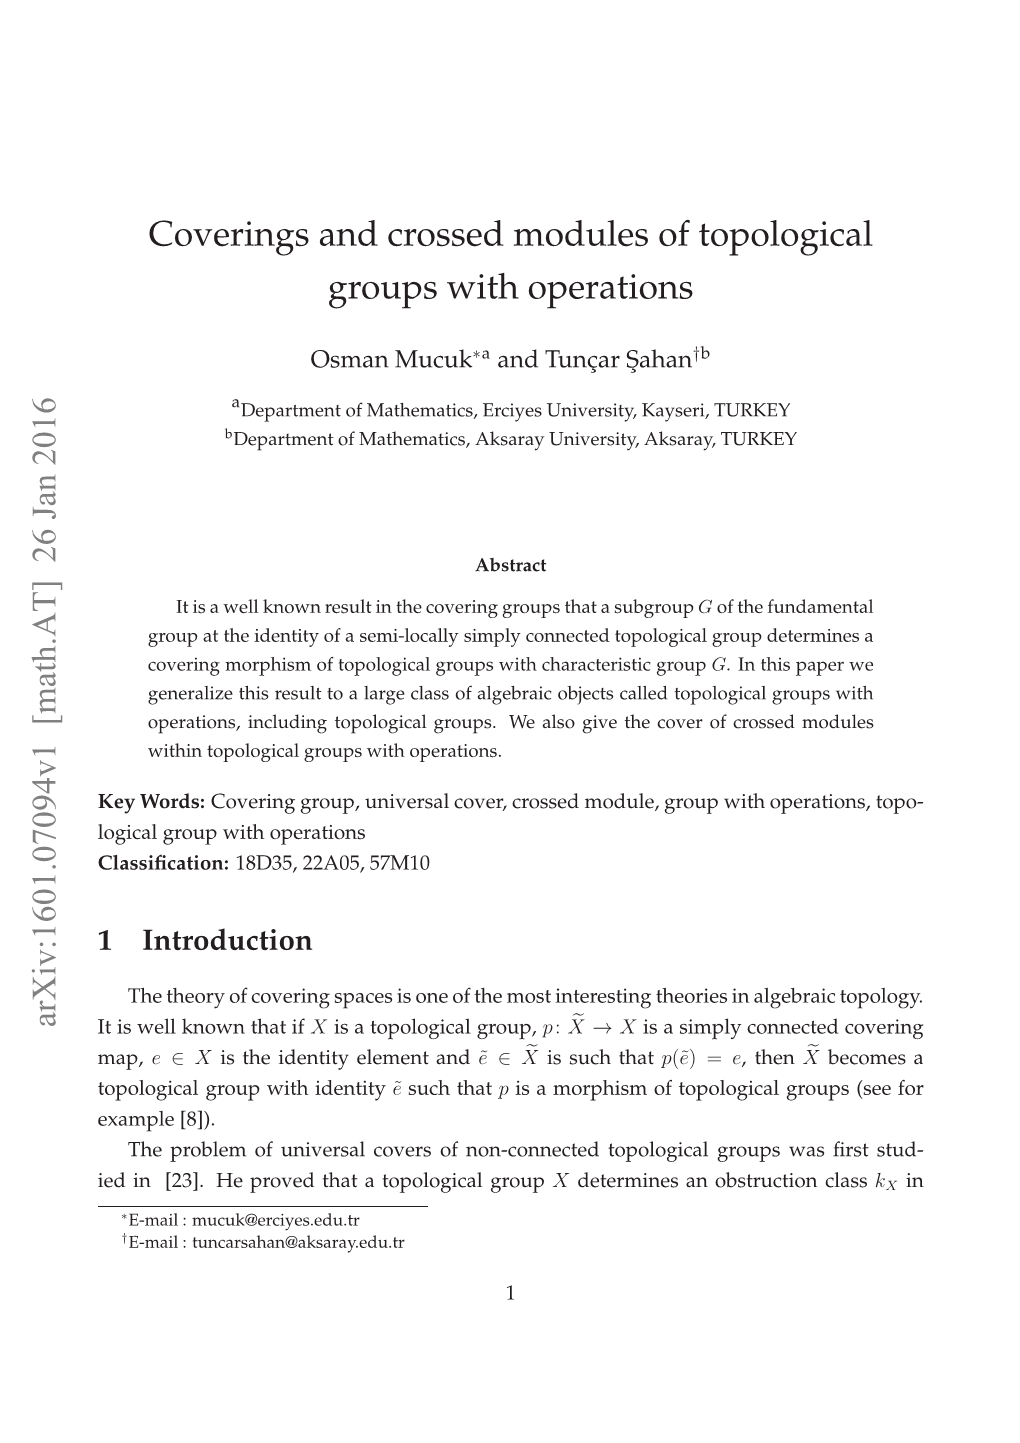 Coverings and Crossed Modules of Topological Groups with Operations